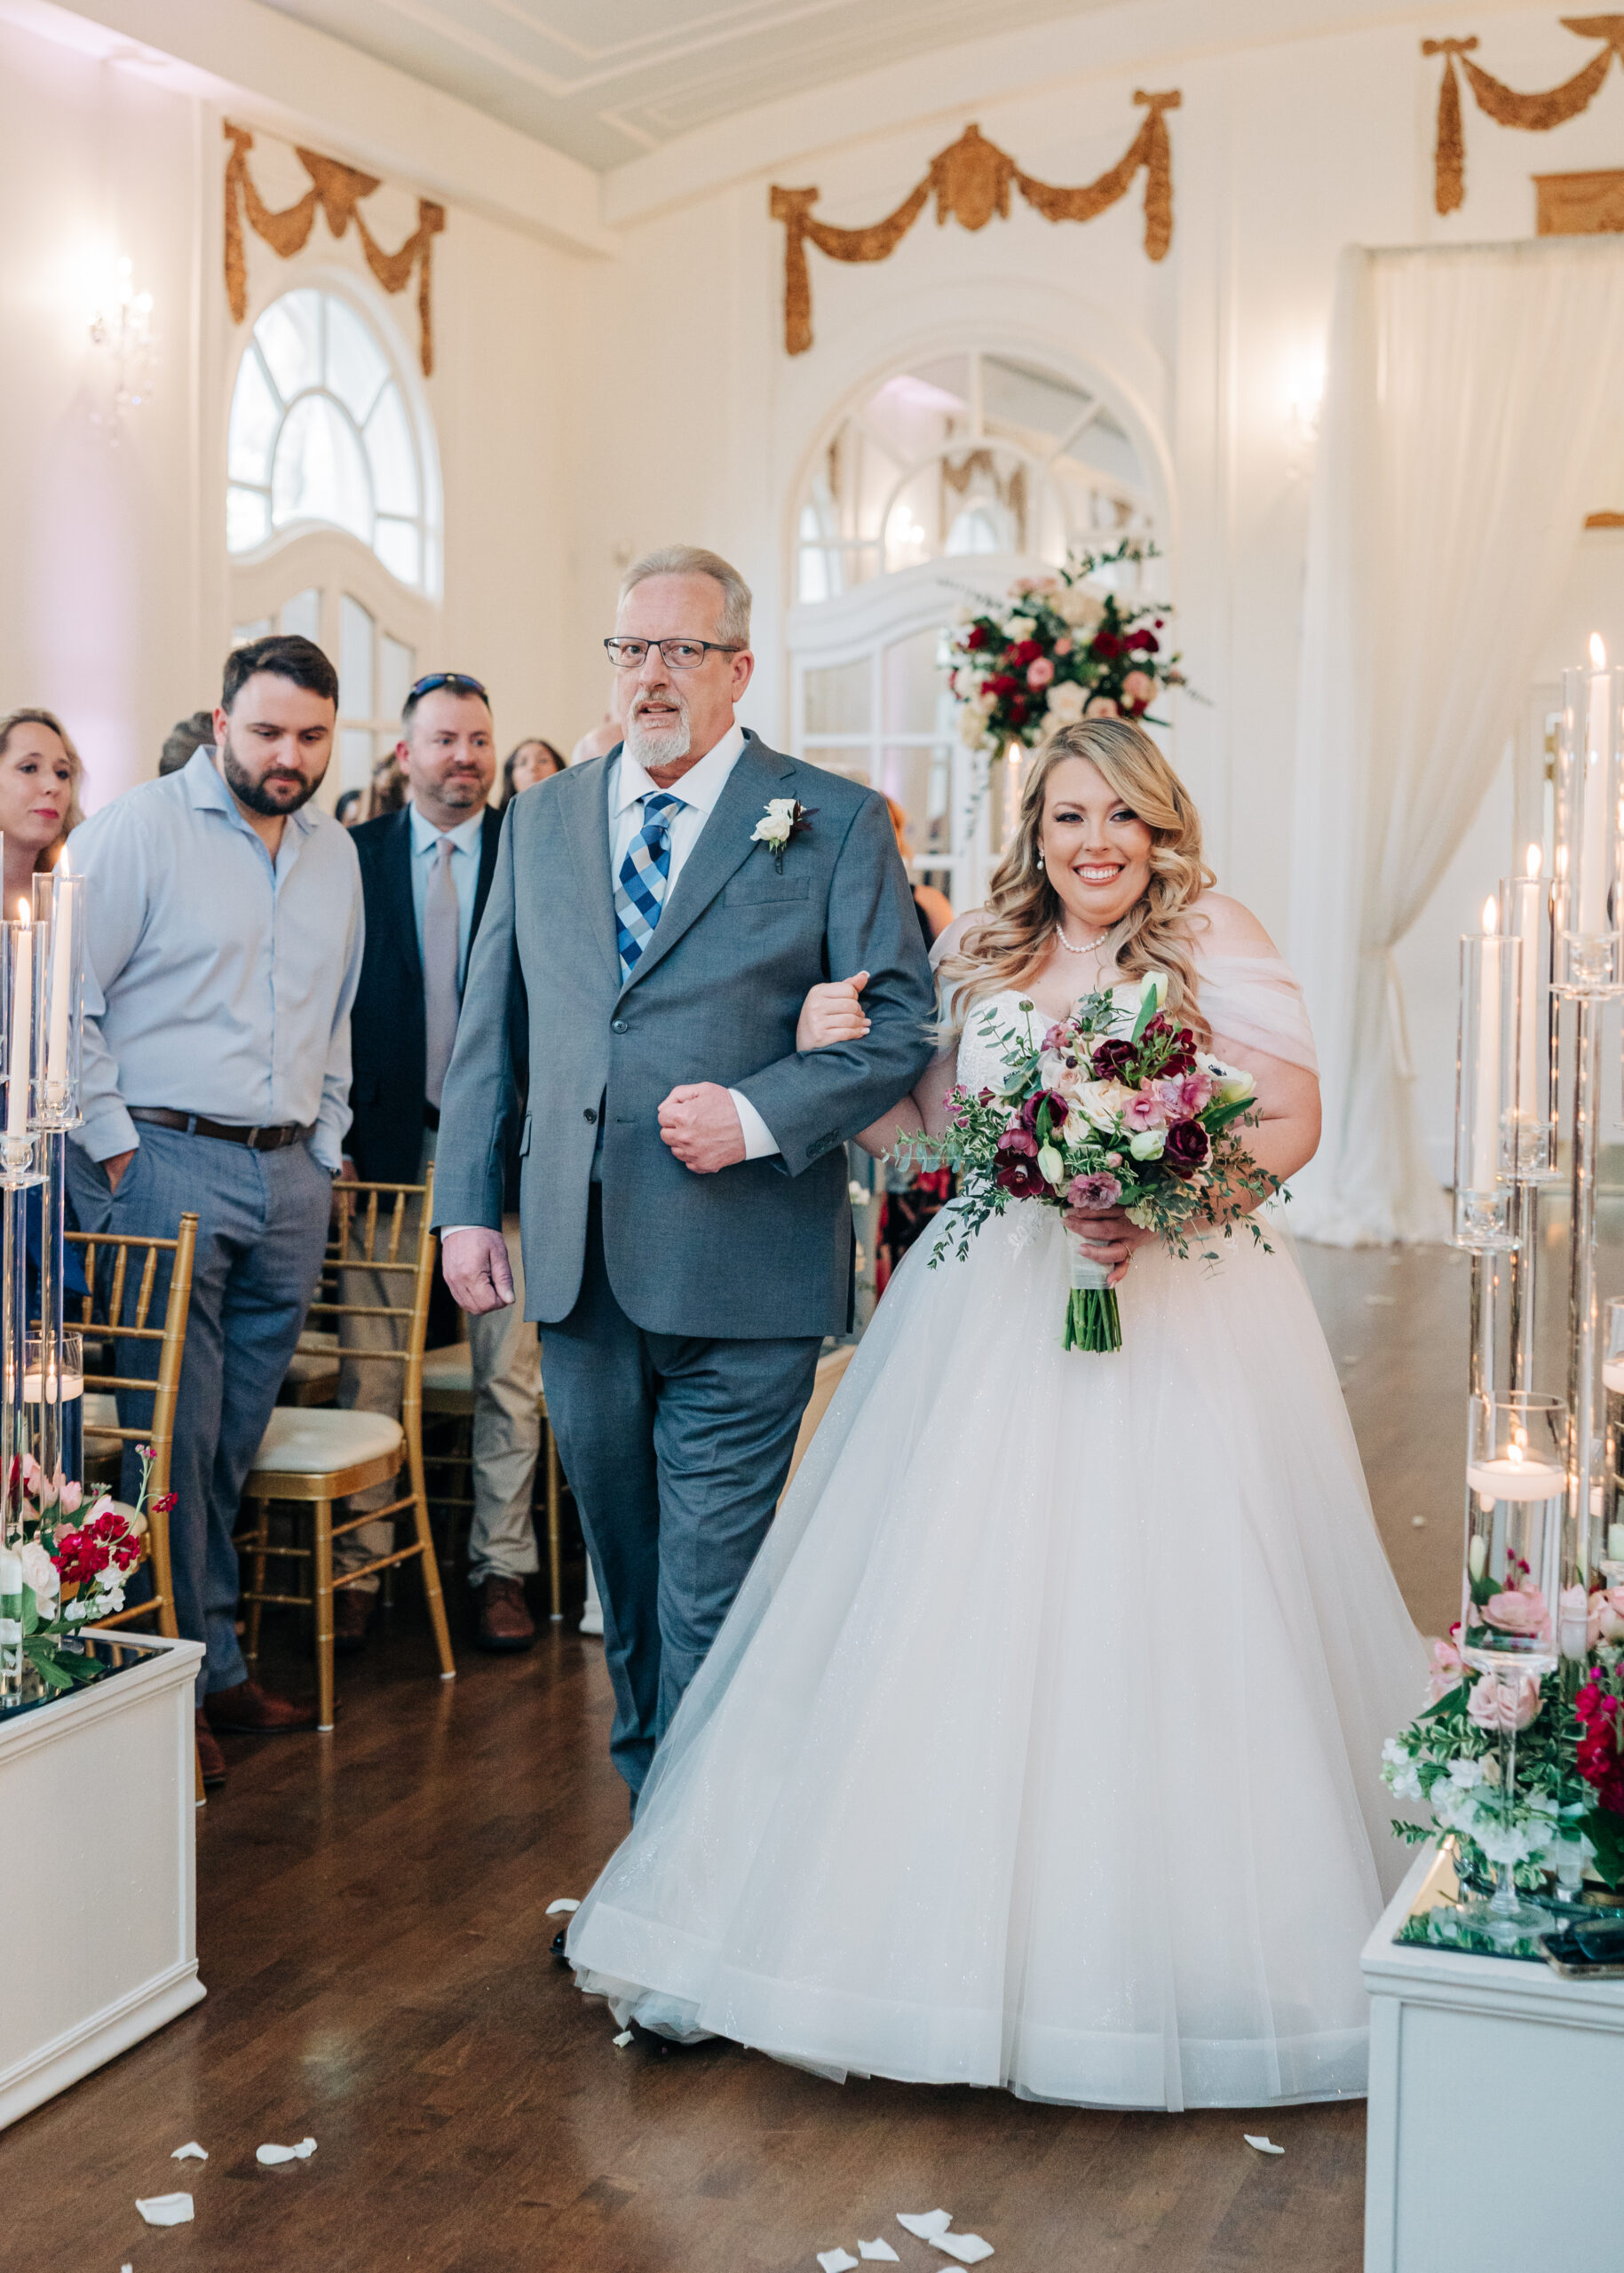 A father walks his daughter down the aisle for her wedding